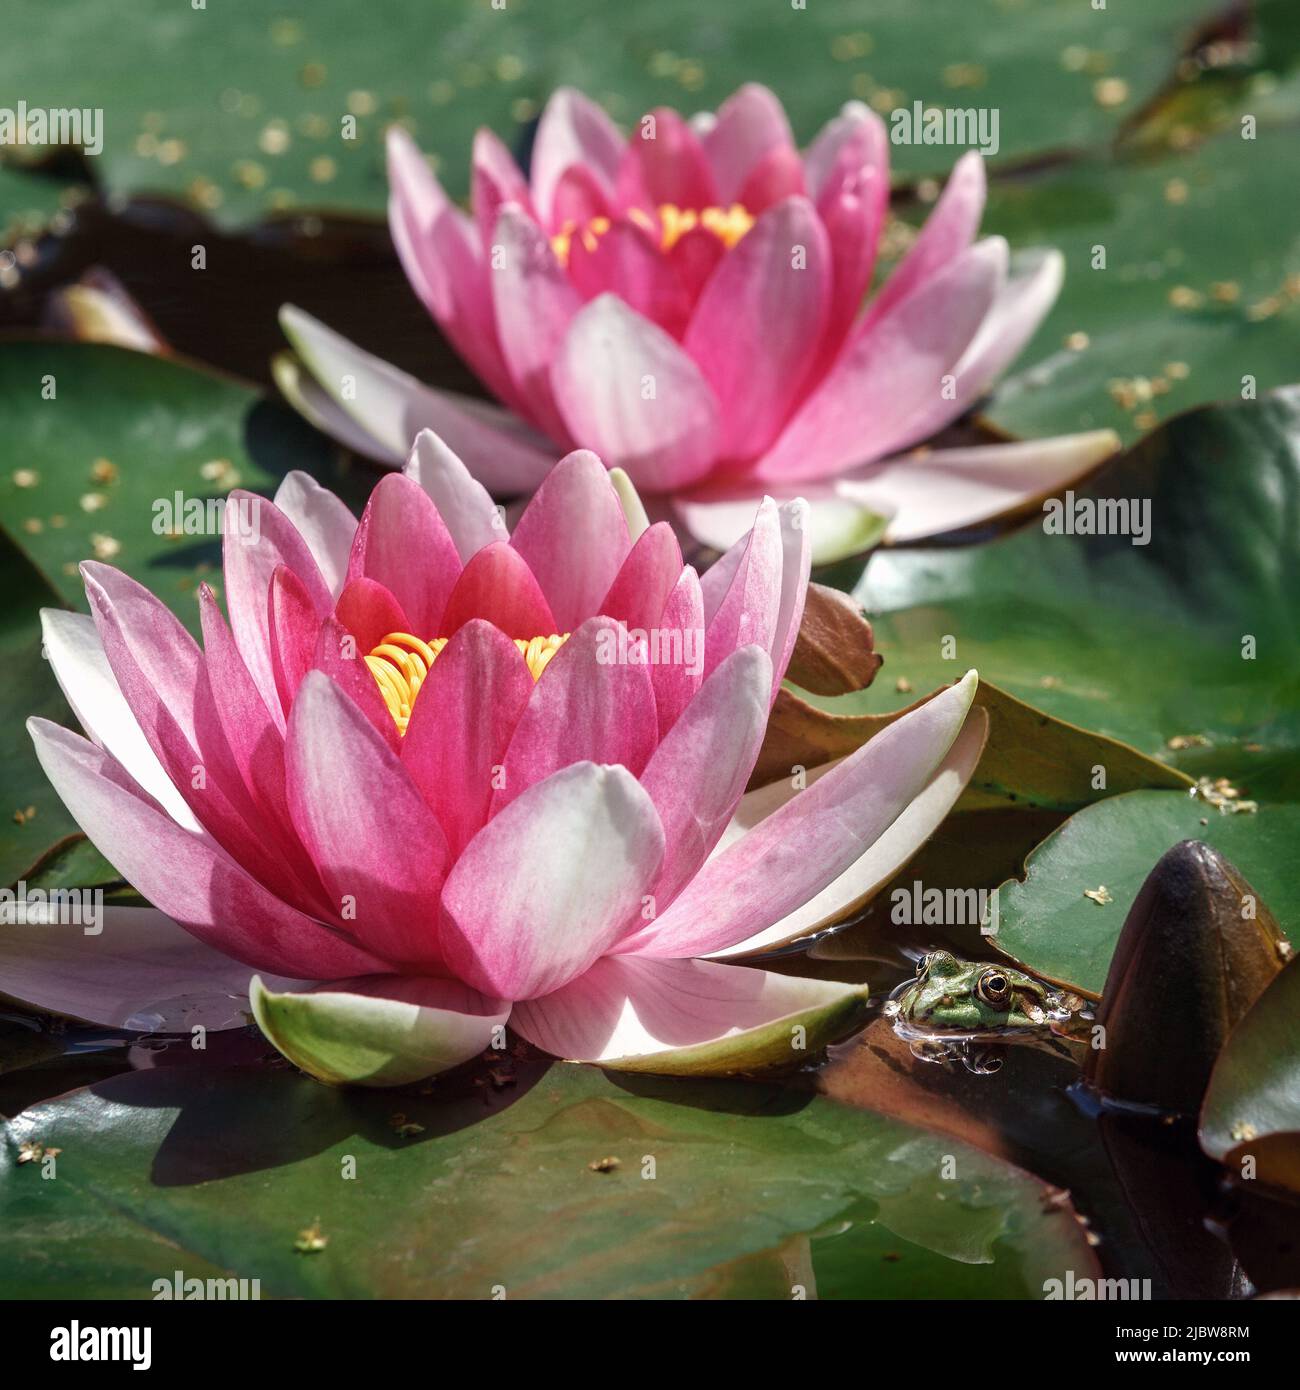 Two pink water lilies on a pond. One bud that has not yet unfolded and a frog in the water next to it. The aspect ratio of the photo is square. Stock Photo